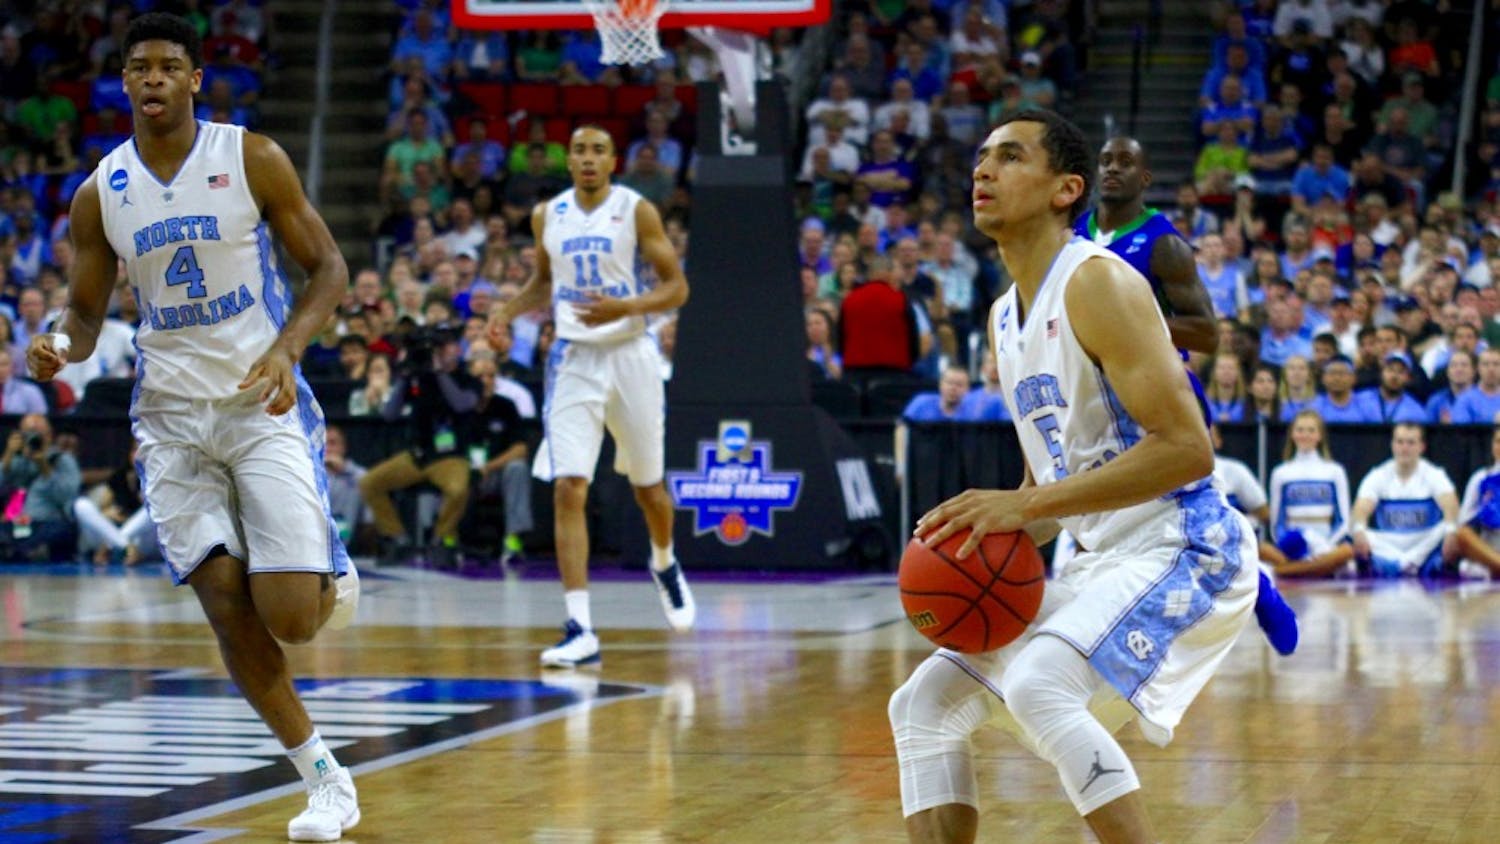 Marcus Paige winds up for a three-point shot.